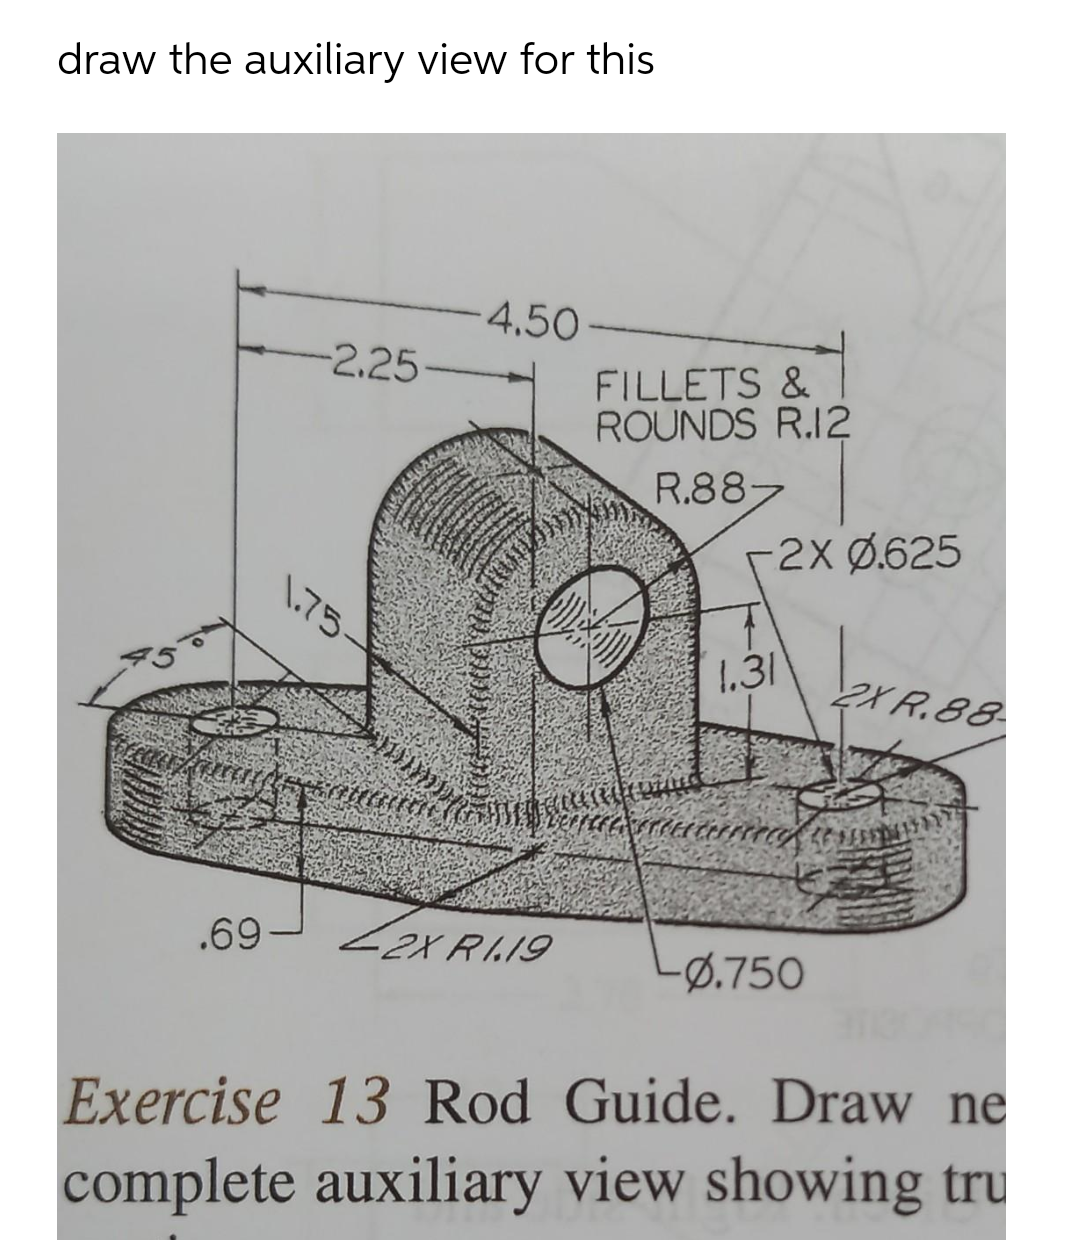 draw the auxiliary view for this
4.50-
-2.25
FILLETS &
ROUNDS R.12
R.887
r2X Ø.625
1.75-
1.31
2X R.88-
.69- Zer RAIS
2X RI.19
-Ø.750
Exercise 13 Rod Guide. Draw ne
complete auxiliary view showing tru
